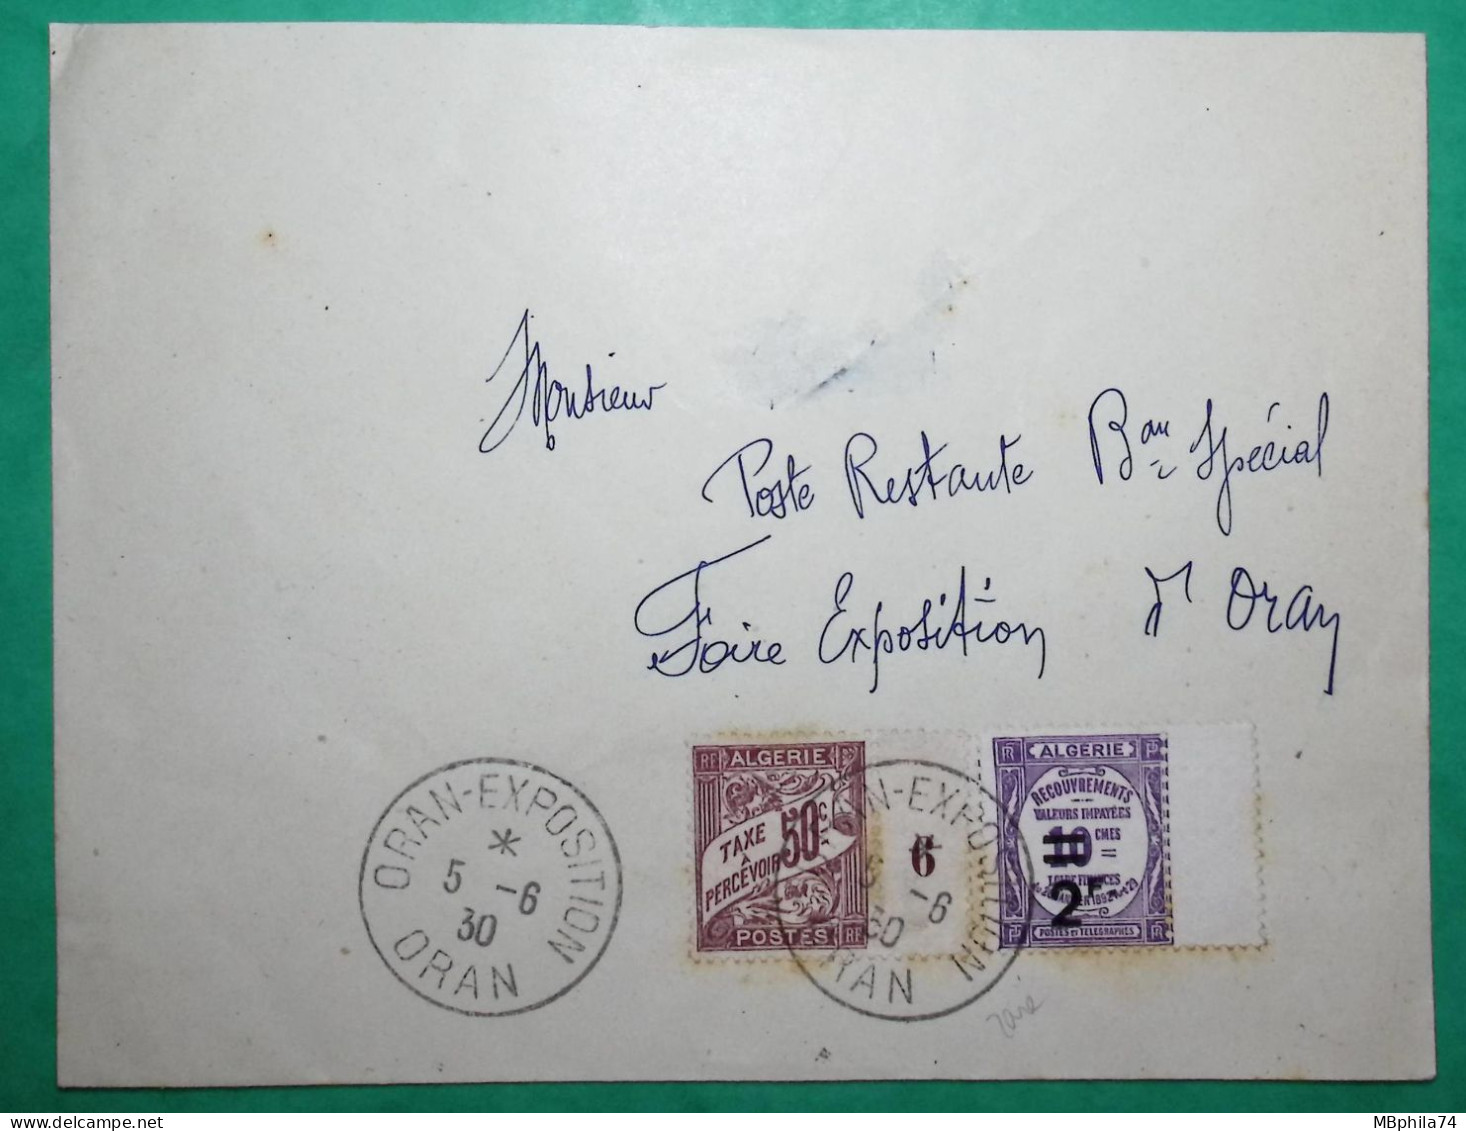 TIMBRES TAXES 50C DUVAL ALGERIE MILLESIME 6 + TAXE RECOUVREMENT SURCHARGE 2F ORAN EXPOSITION 1930 COVER FRANCE - Postage Due